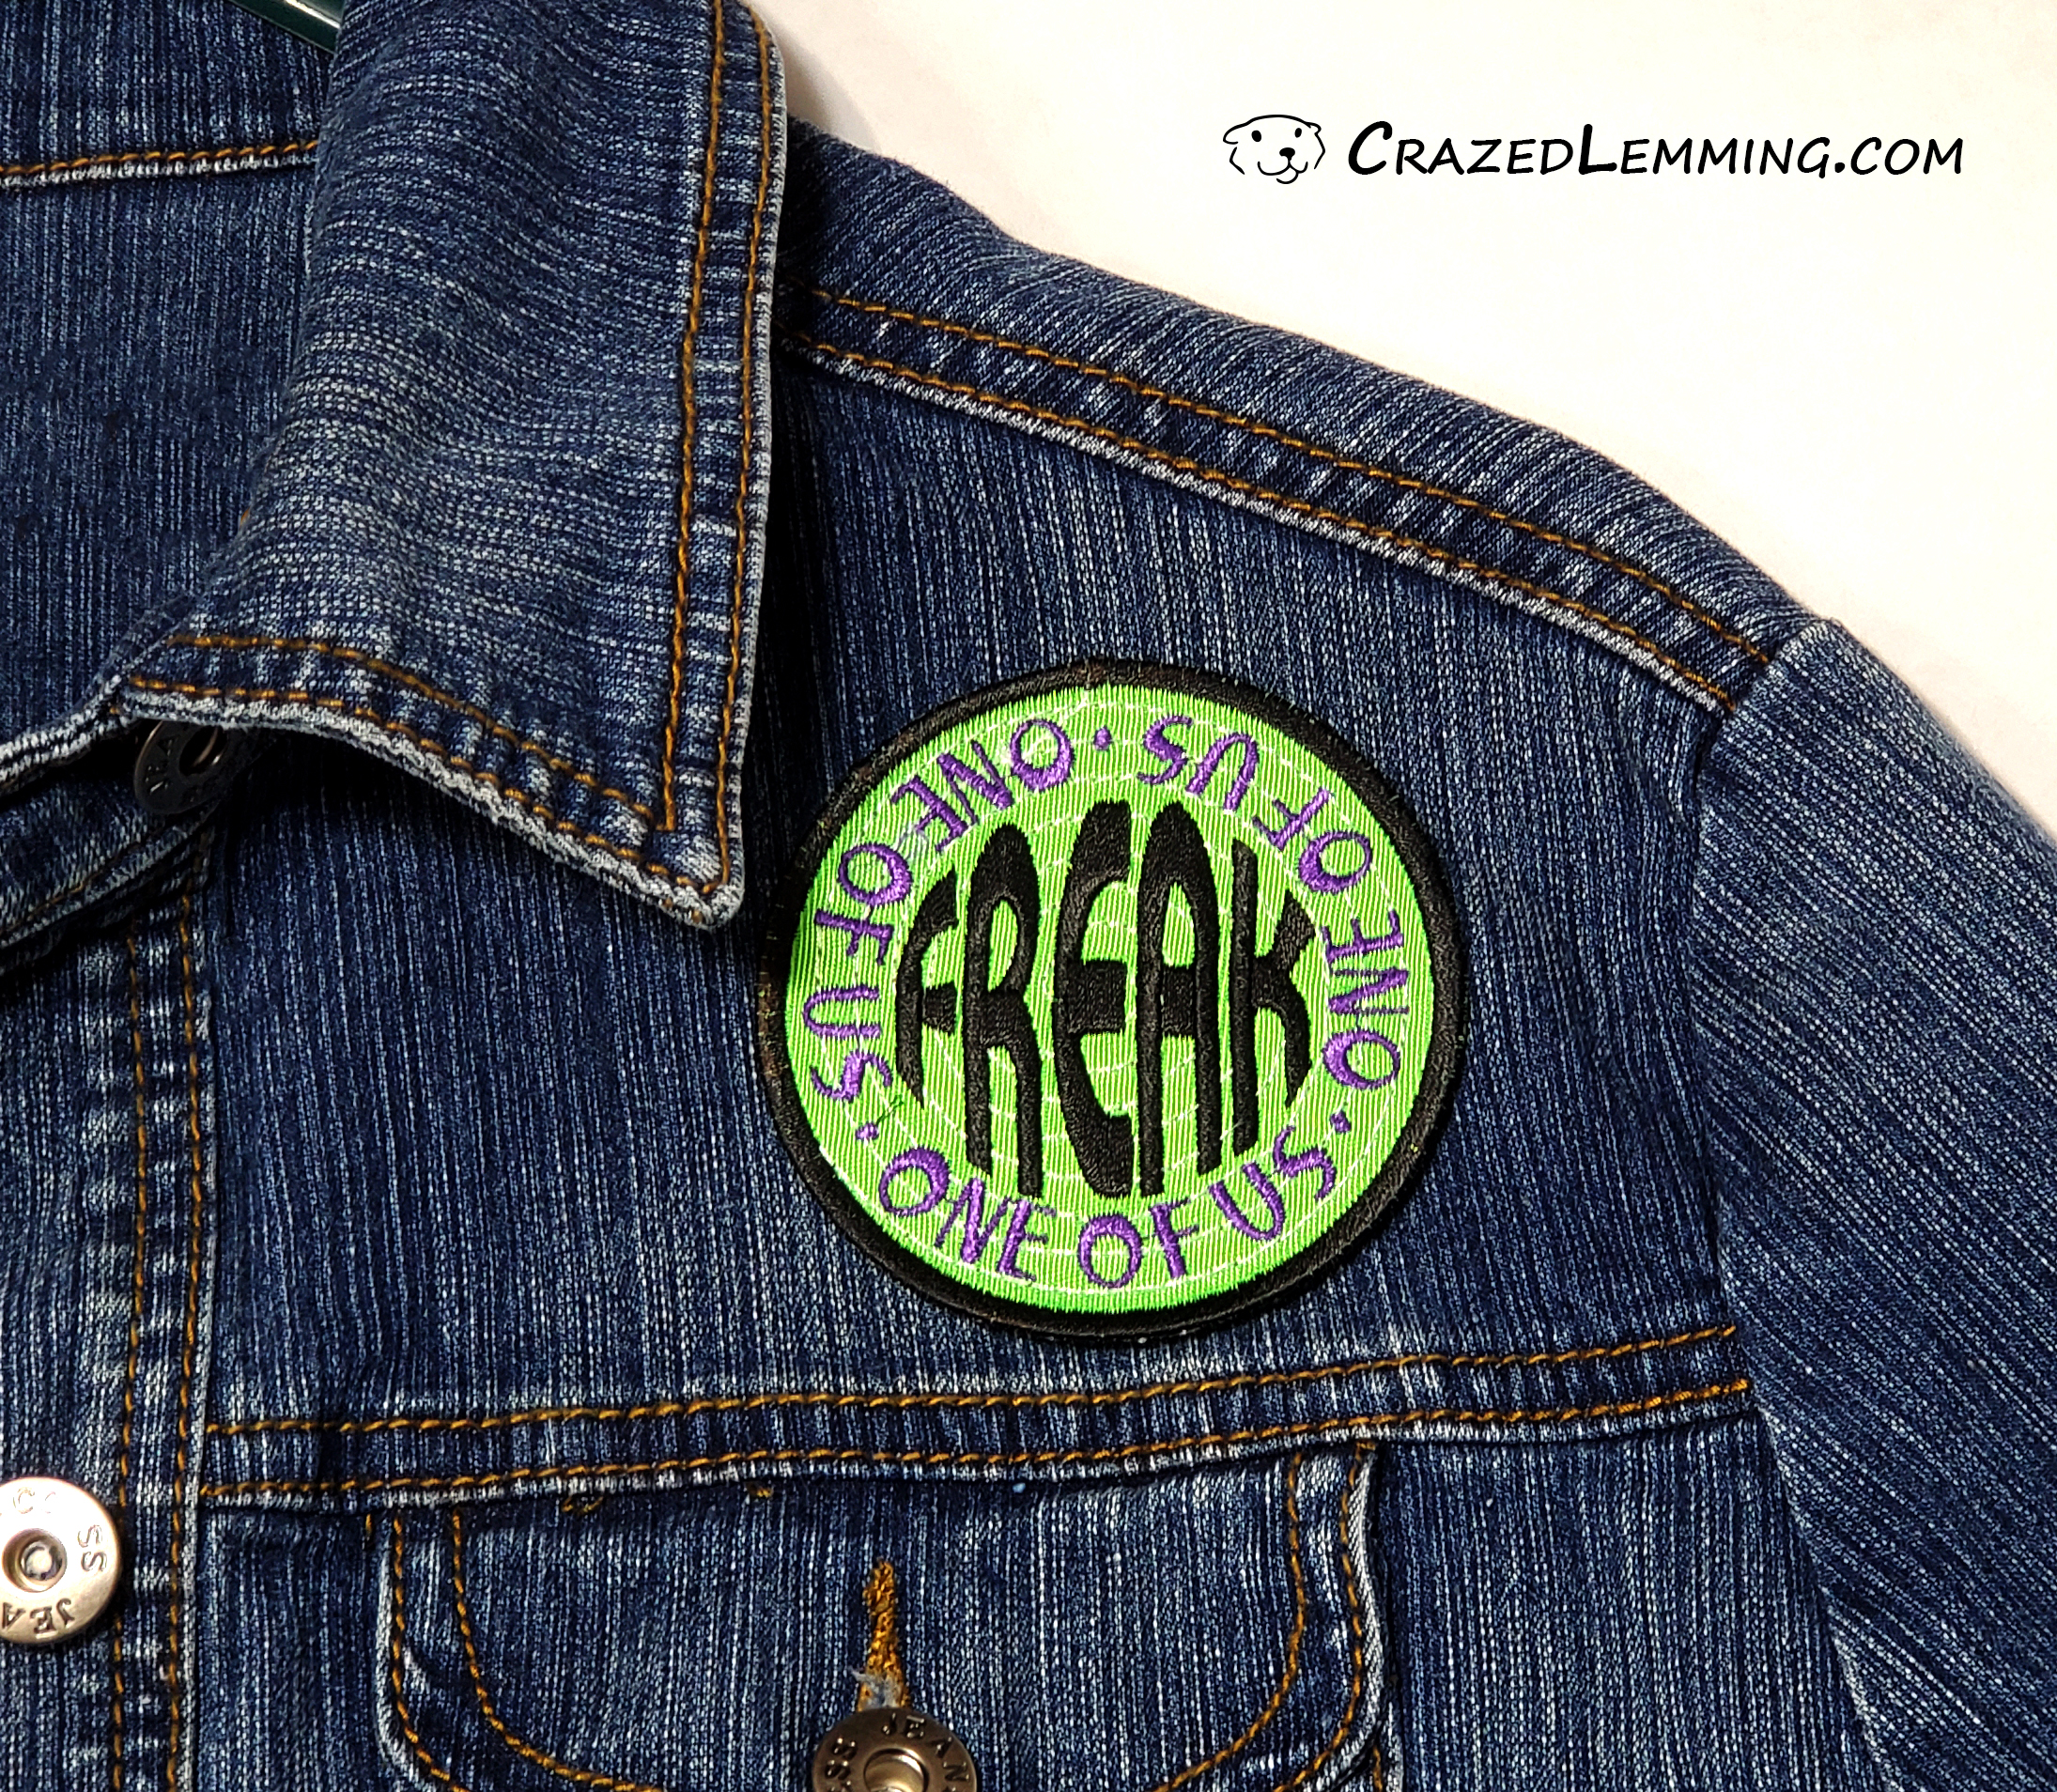 Cool Patch, 1-pc, The Plug Jacket Patch, Iron-on Embroidered